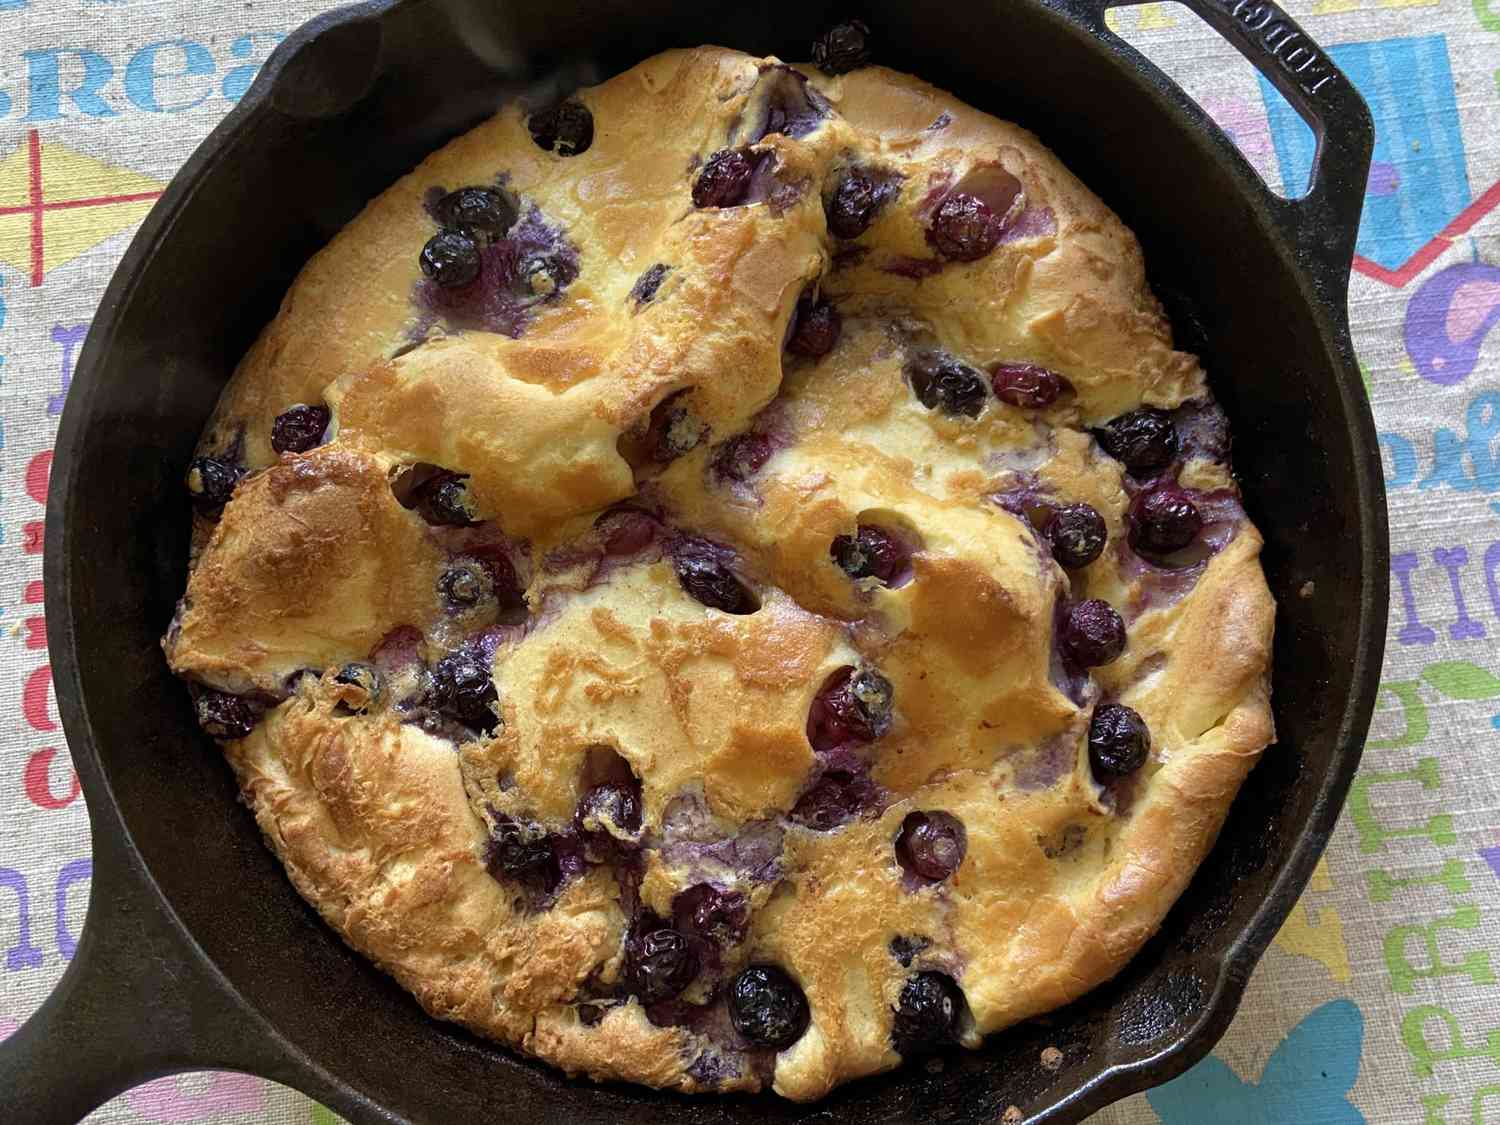 Chef John's Blueberry Dutch Baby baked in a cast iron skillet